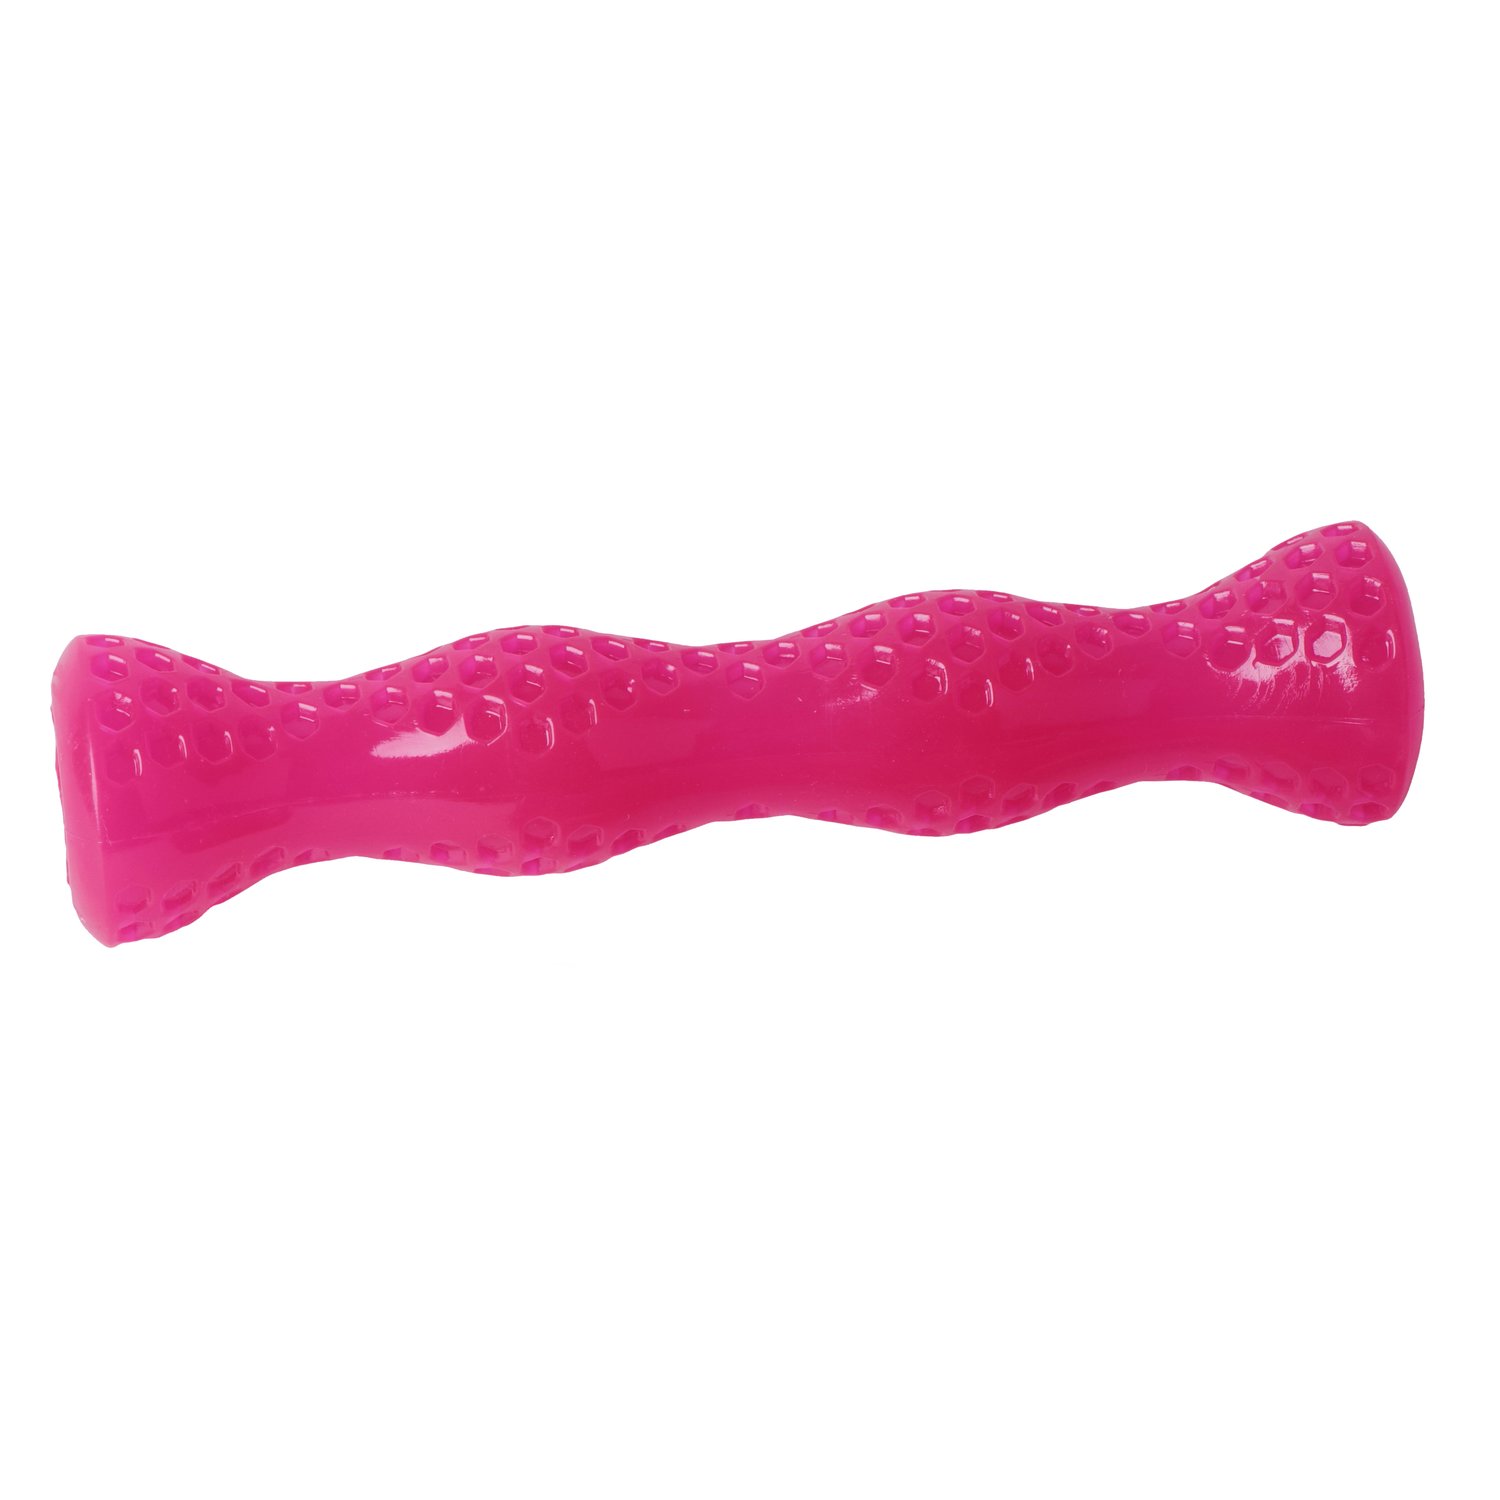 Bubimex Hundespielzeug Super Strong 17 cm